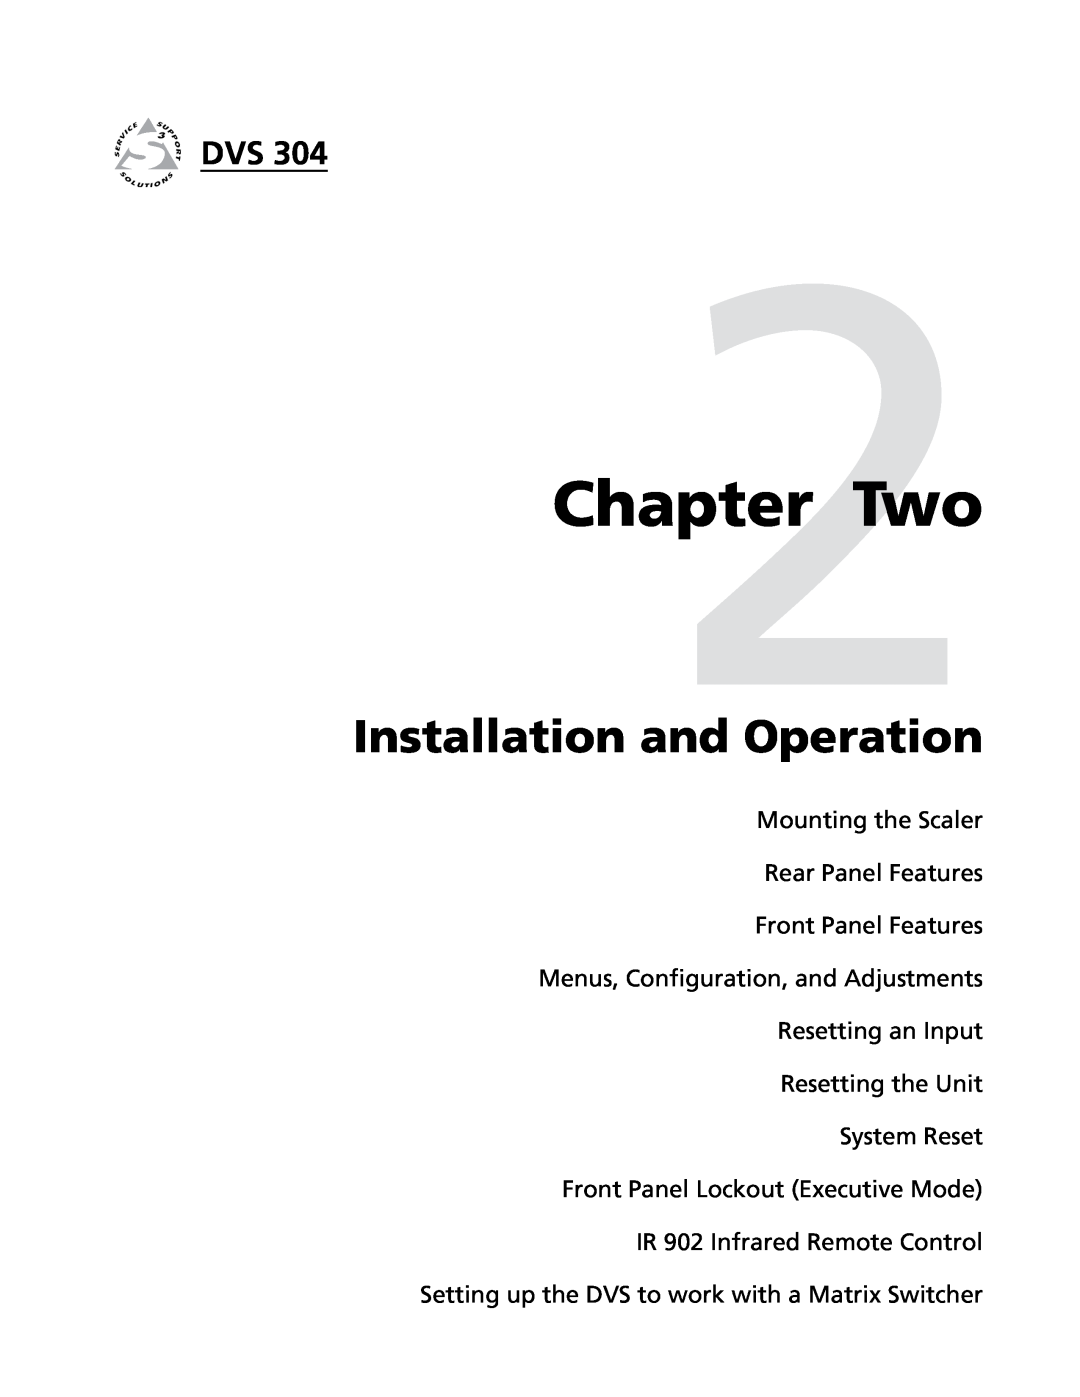 Extron electronic DVS 304 D manual DVS 304Chapter2Two, Installation and Operation, Mounting the Scaler Rear Panel Features 